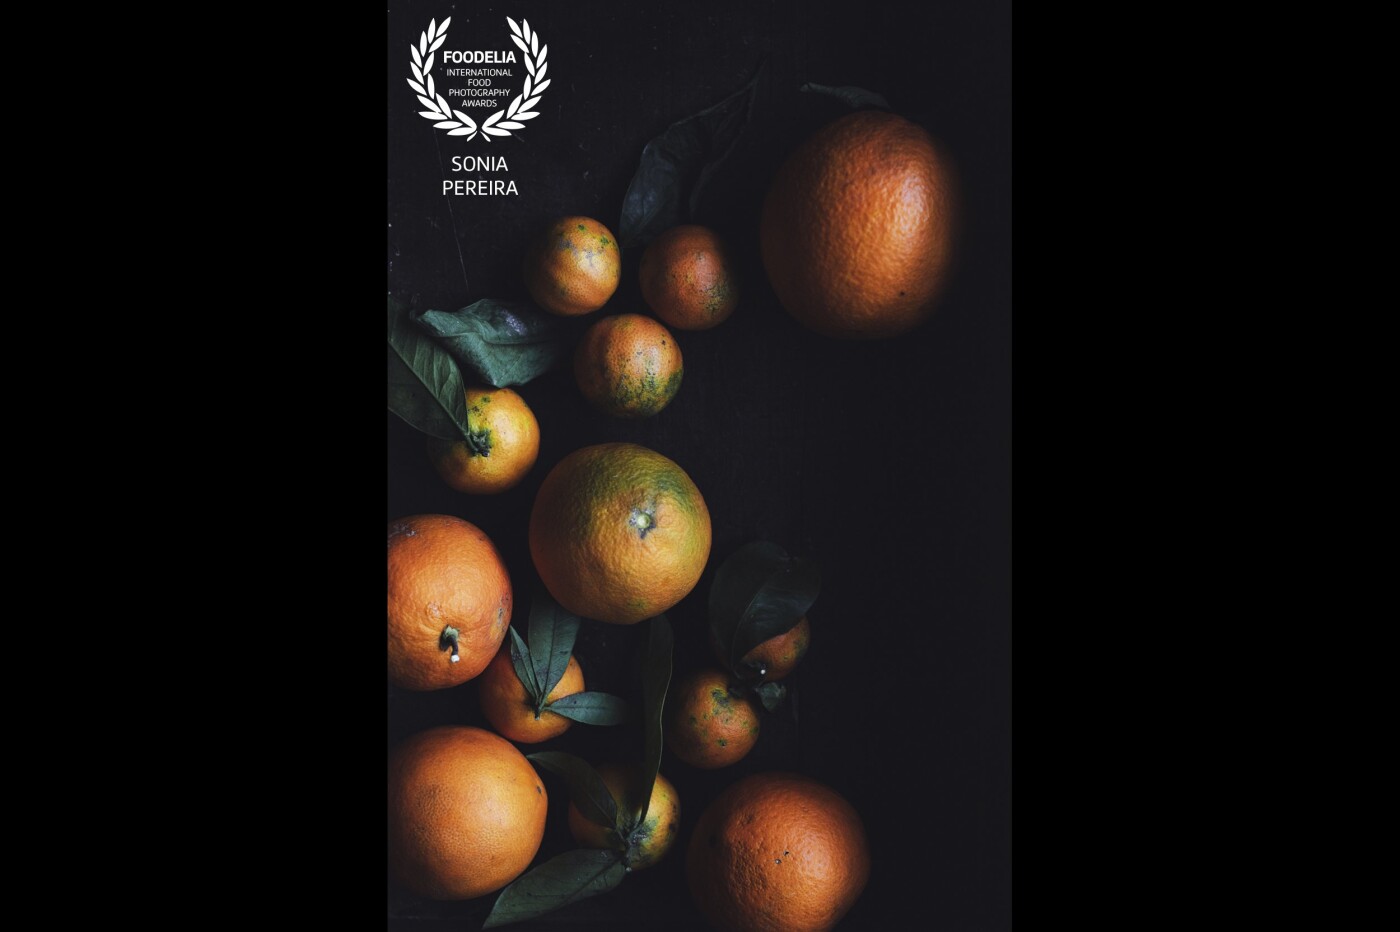 Oranges and Clementines still life capture to represent the citrus season.<br />
Shot with natural light inside a box to create more shadows and a moody look.